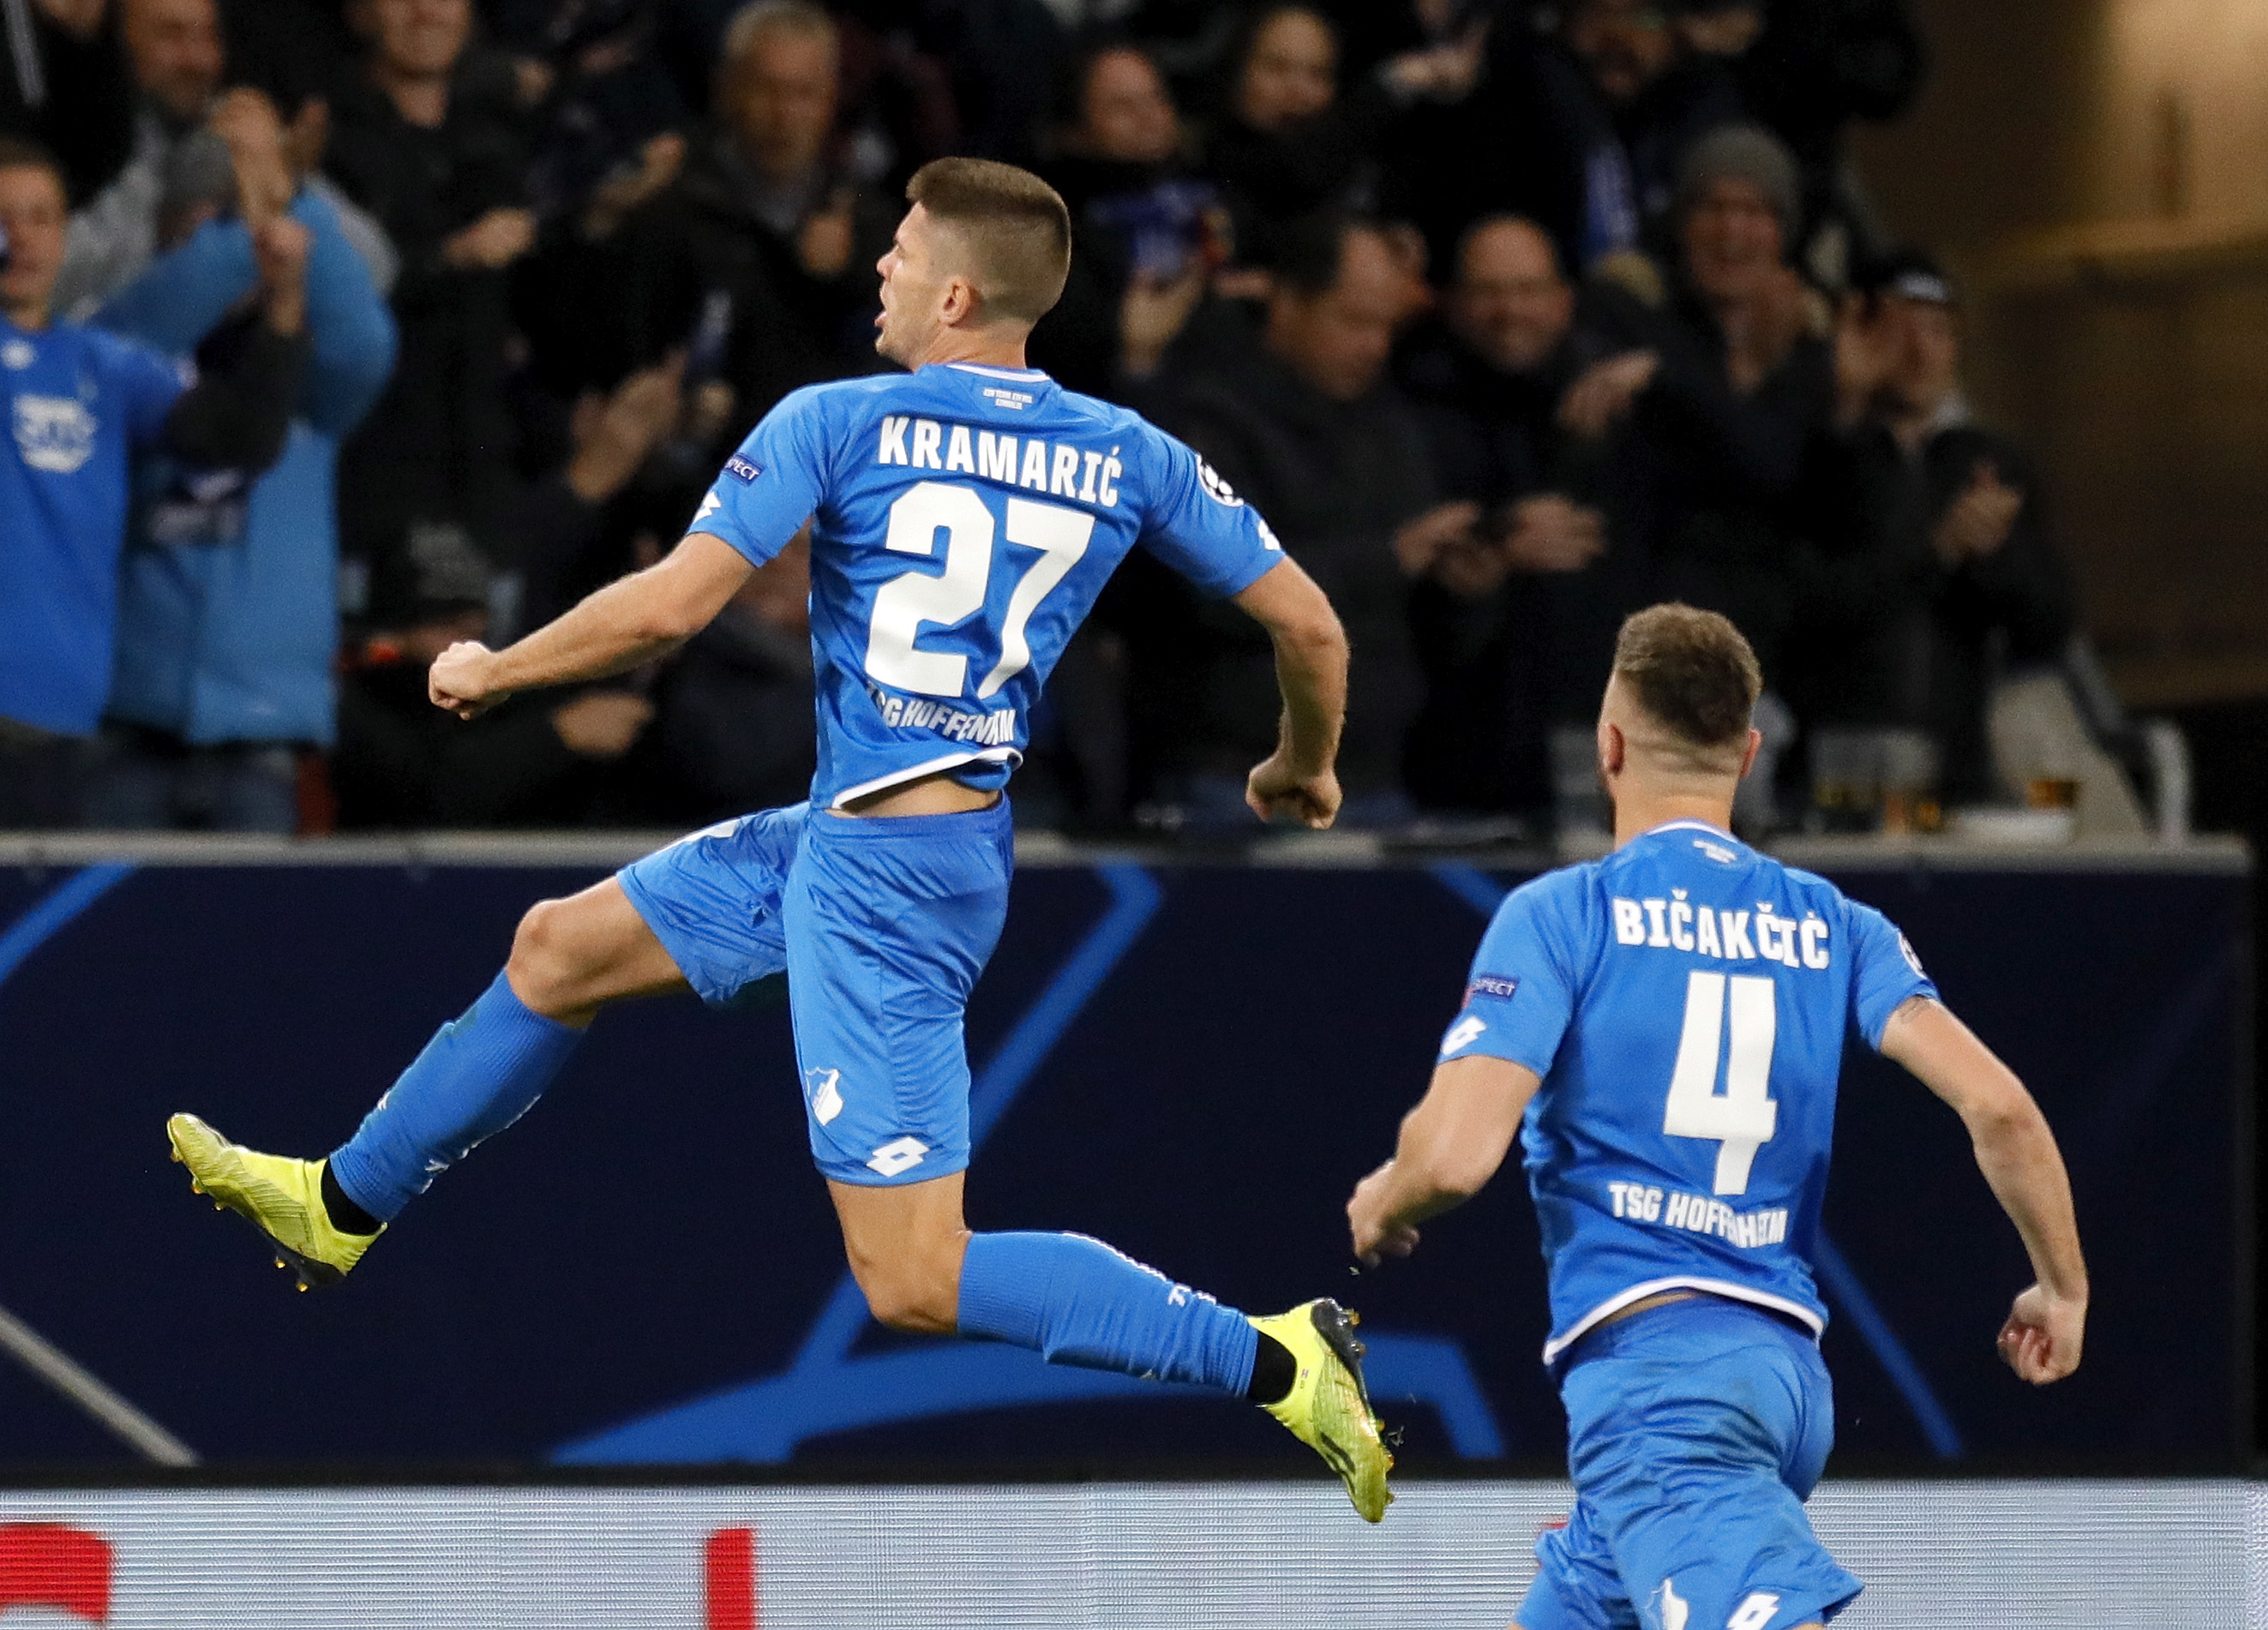 epa07114648 Hoffenheim's Andrej Kramaric (L) celebrates with his teammates after scoring the 2-1 lead during the UEFA Champions League Group F round match between TSG 1899 Hoffenheim and Olympique Lyonnais in Sinsheim, Germany, 23 October 2018.  EPA/RONALD WITTEK